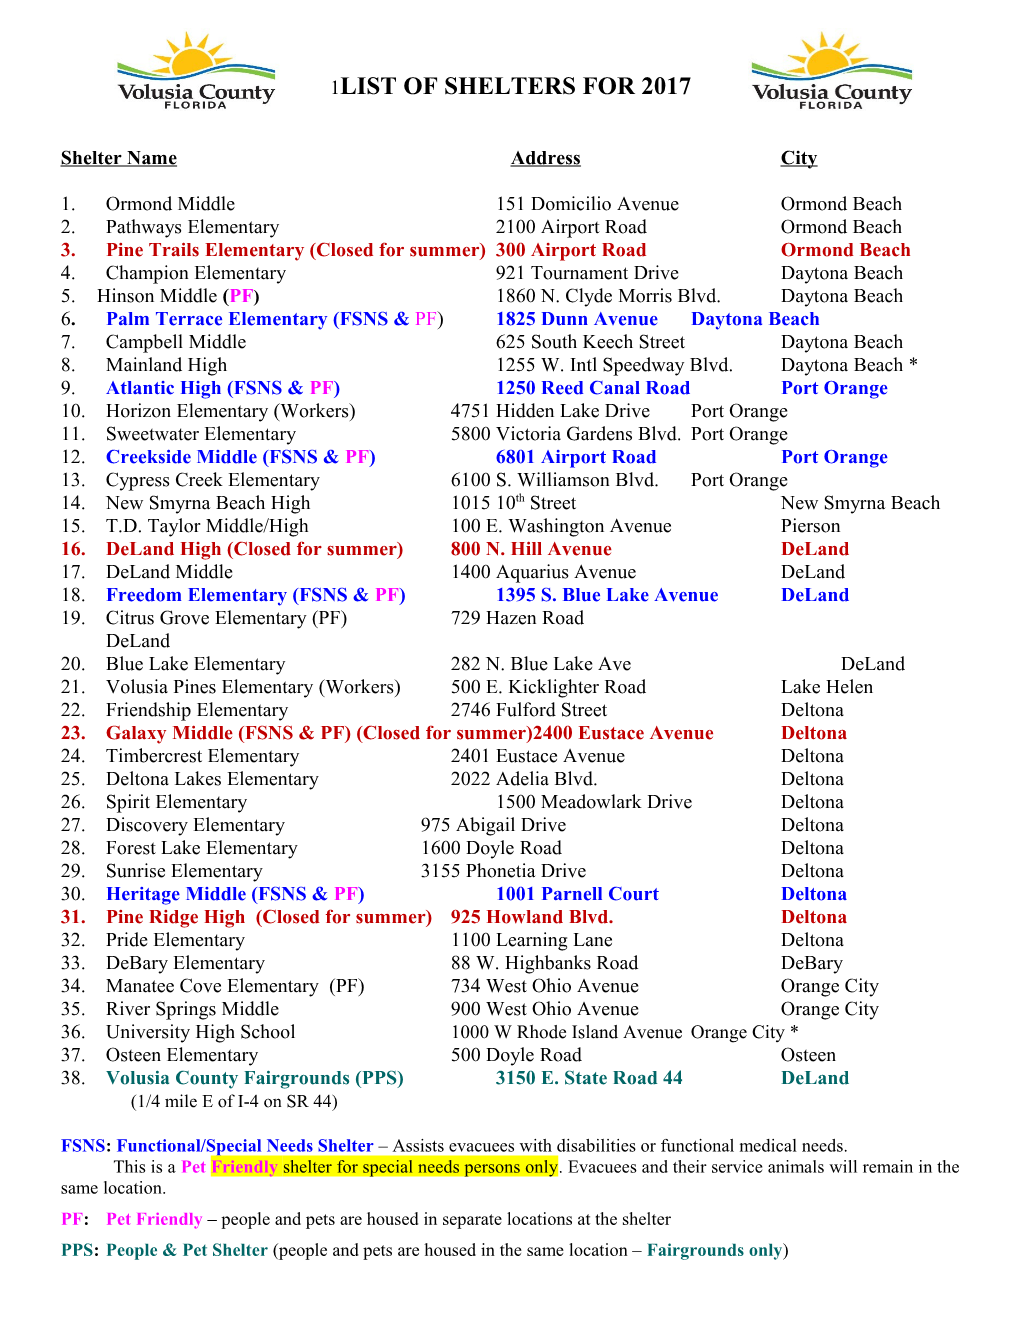 List of Shelters for 2005